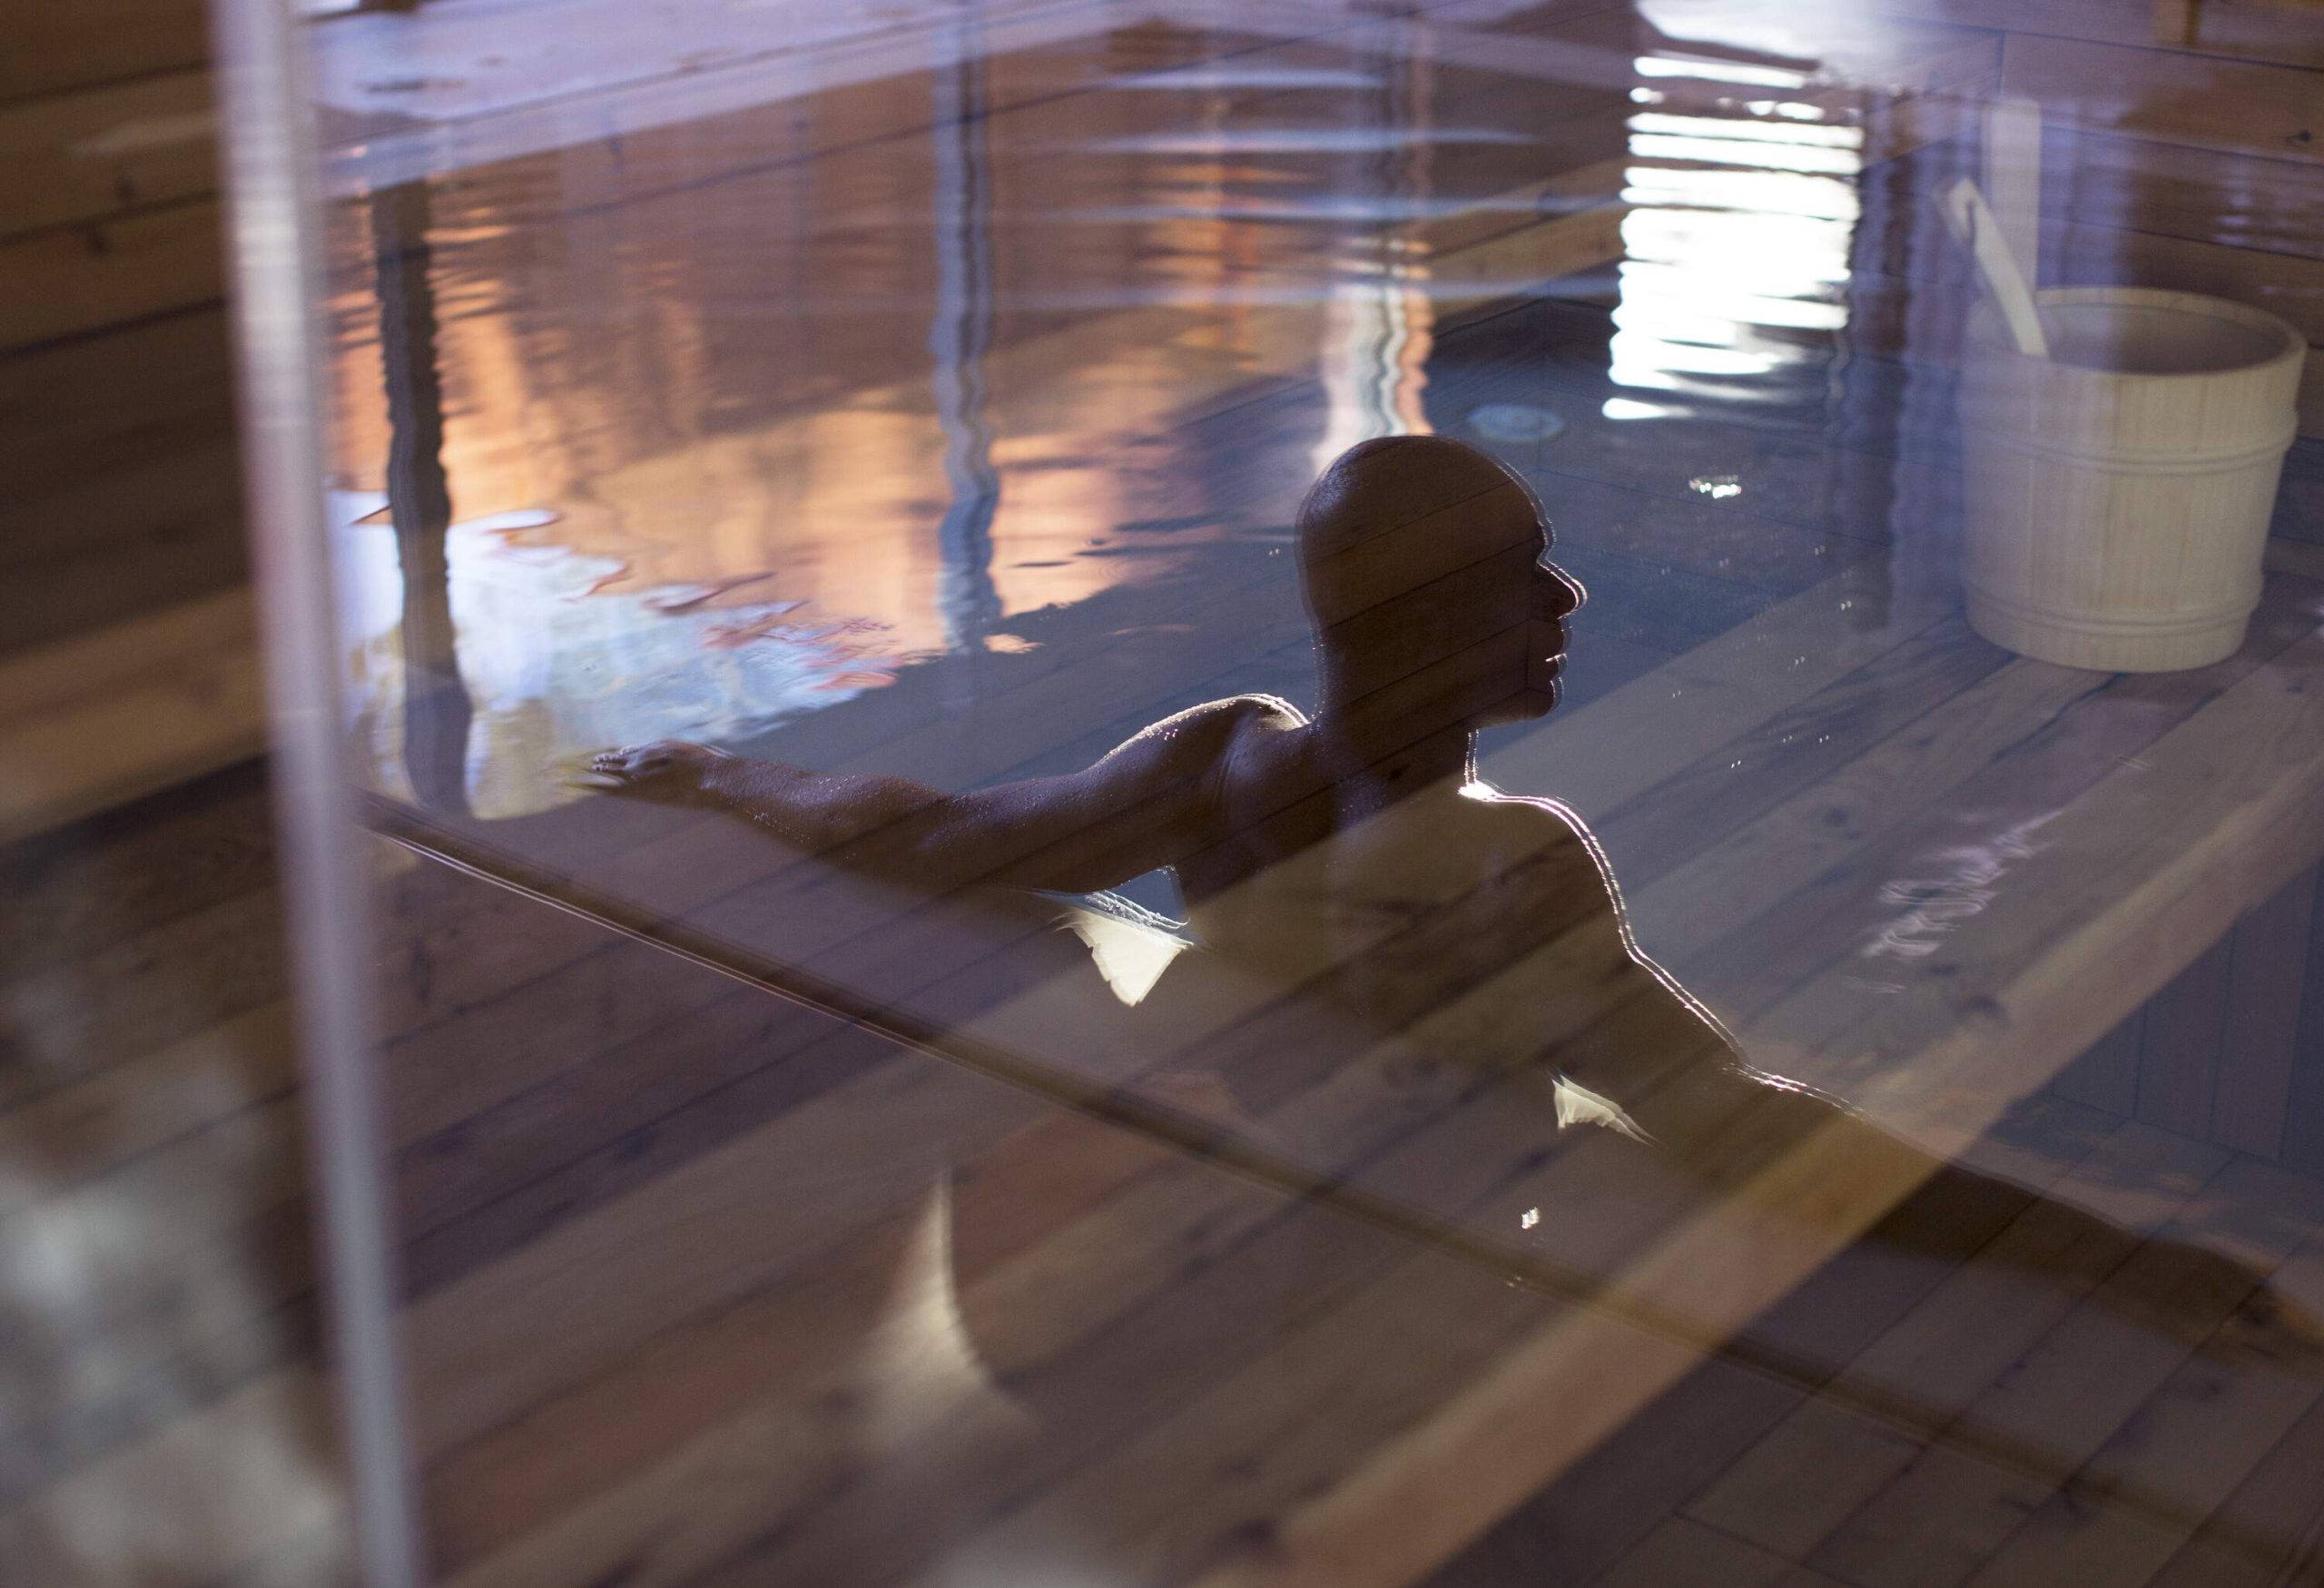 A bald man leans his back on the edge of the pool sauna seen through the glass.